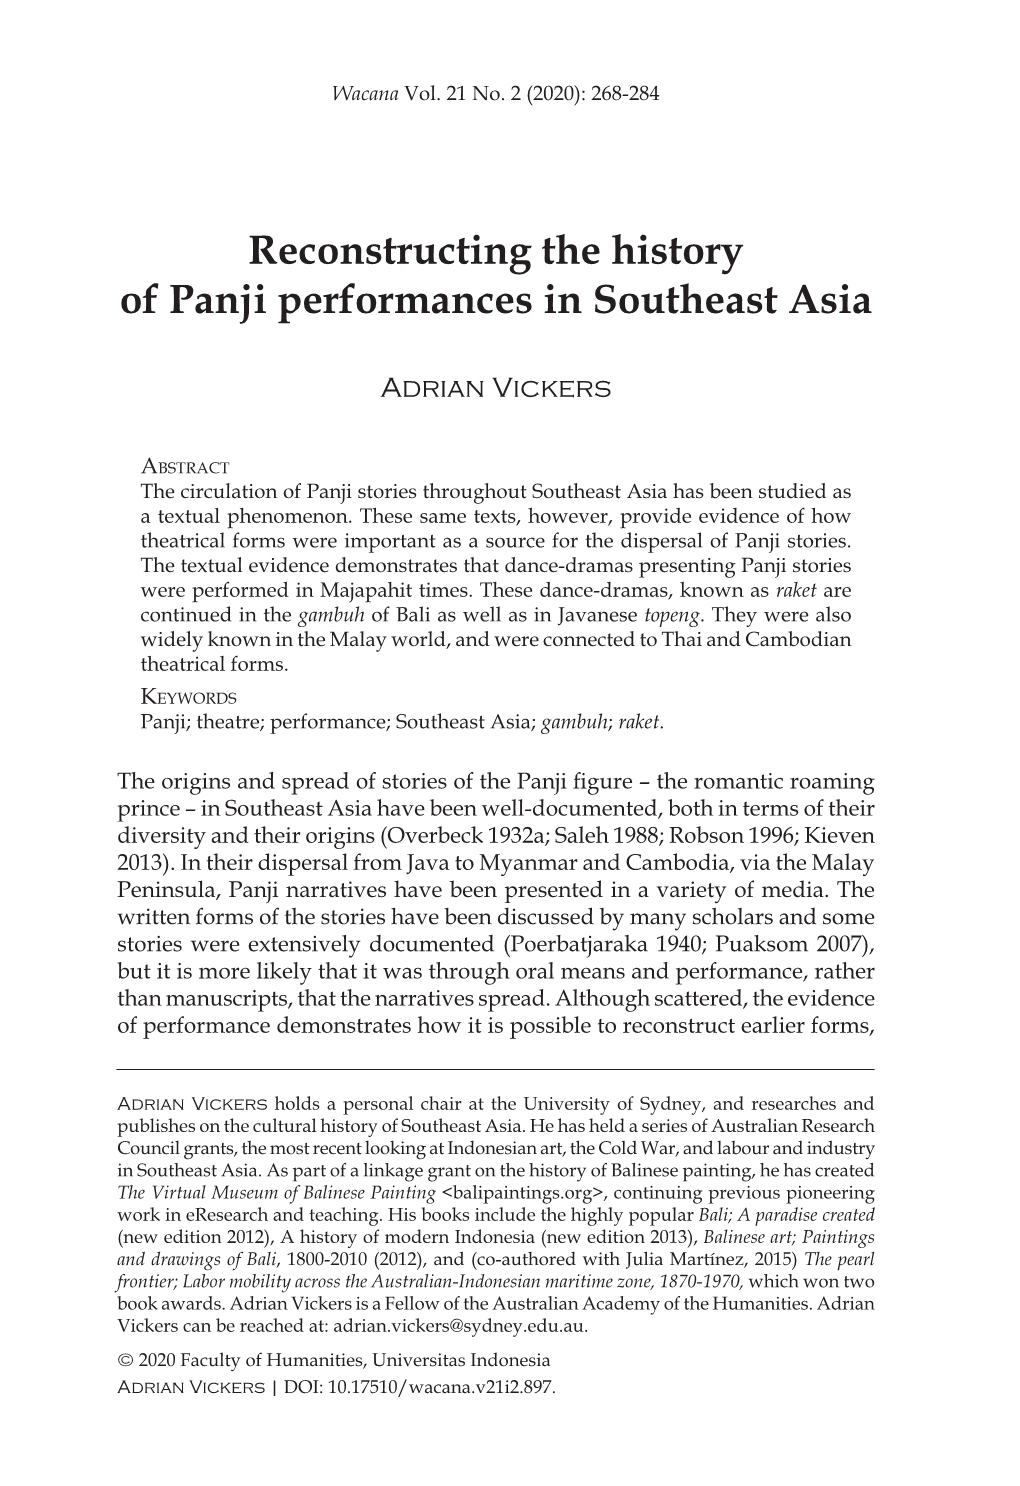 Reconstructing the History of Panji Performances in Southeast Asia